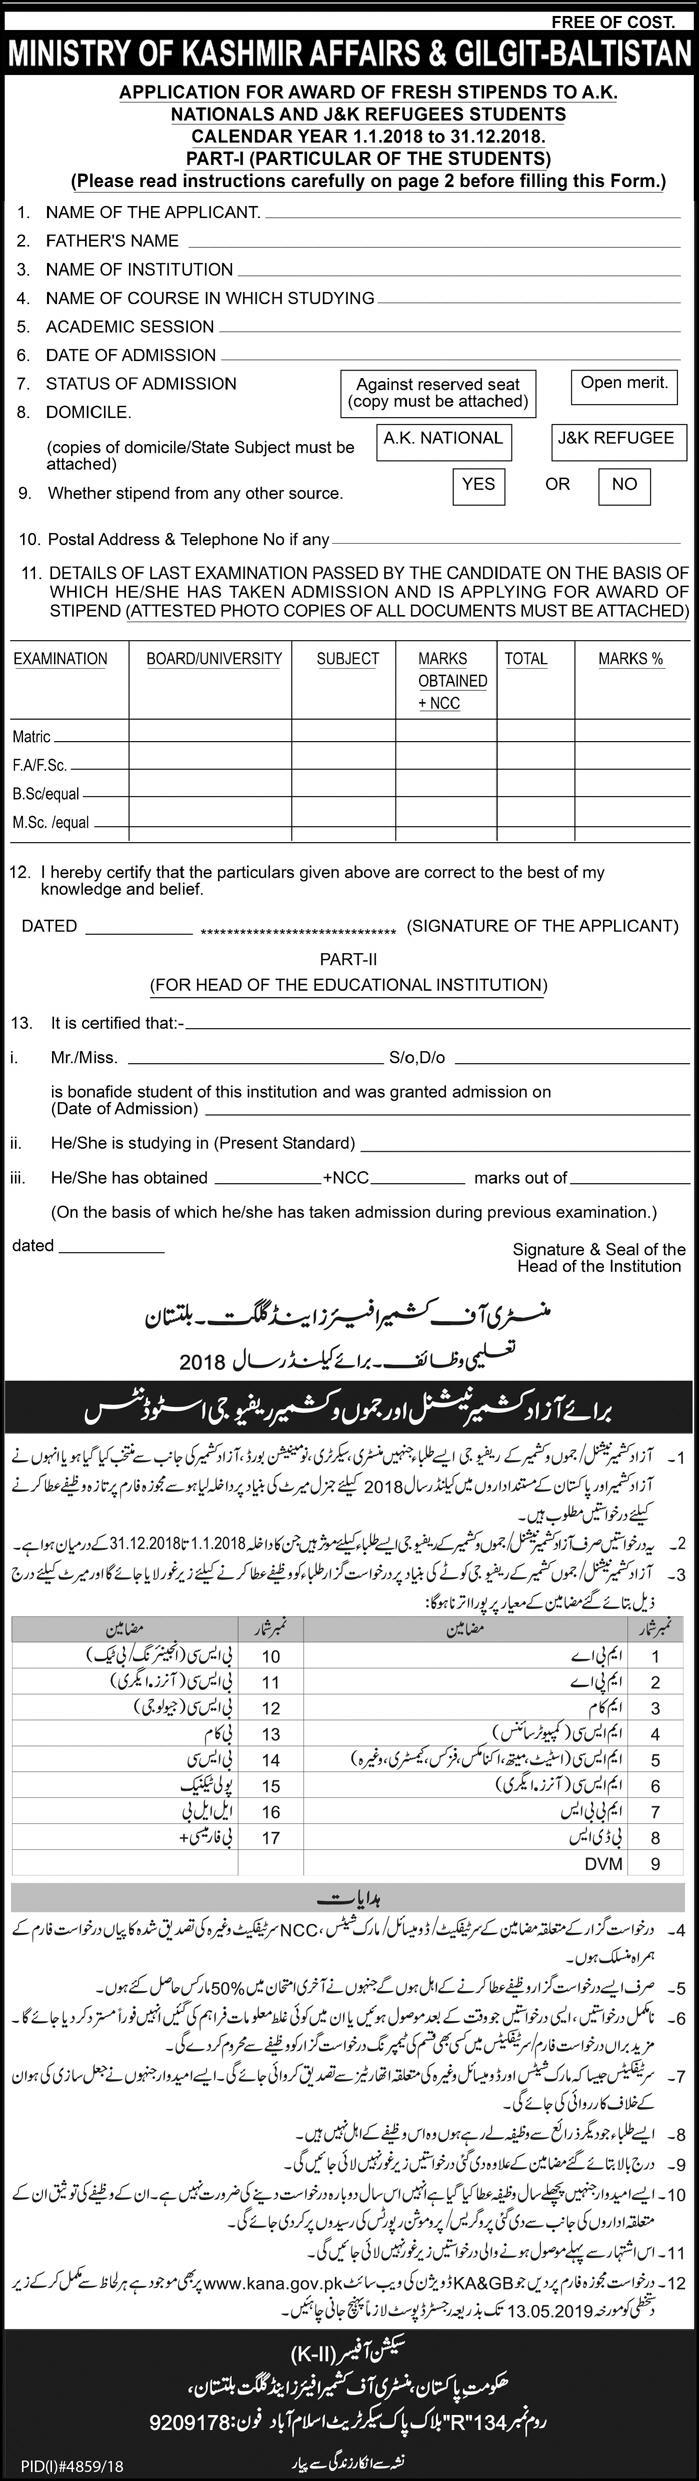 Scholarships For AJK Students 2019, Form Download